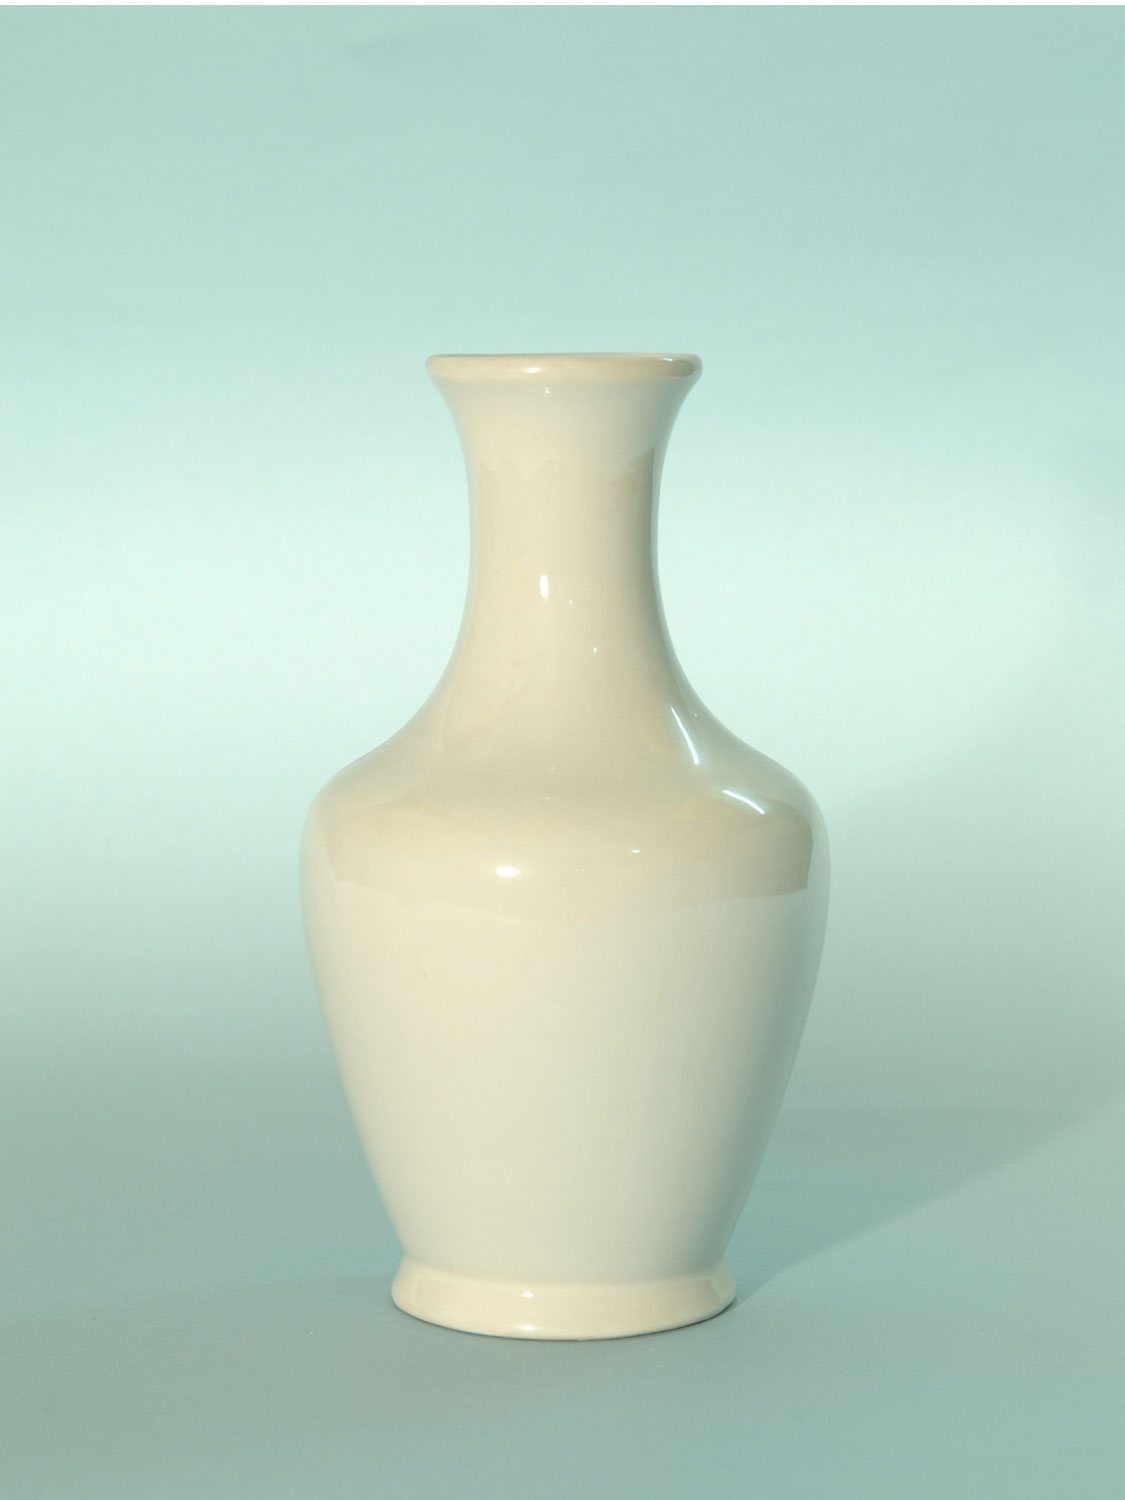 White sugar glass vase, model Cleopatra. 19.5 x 11 cm. Need fragile glass? On a safe set you use sugar glass / fake glass where necessary.